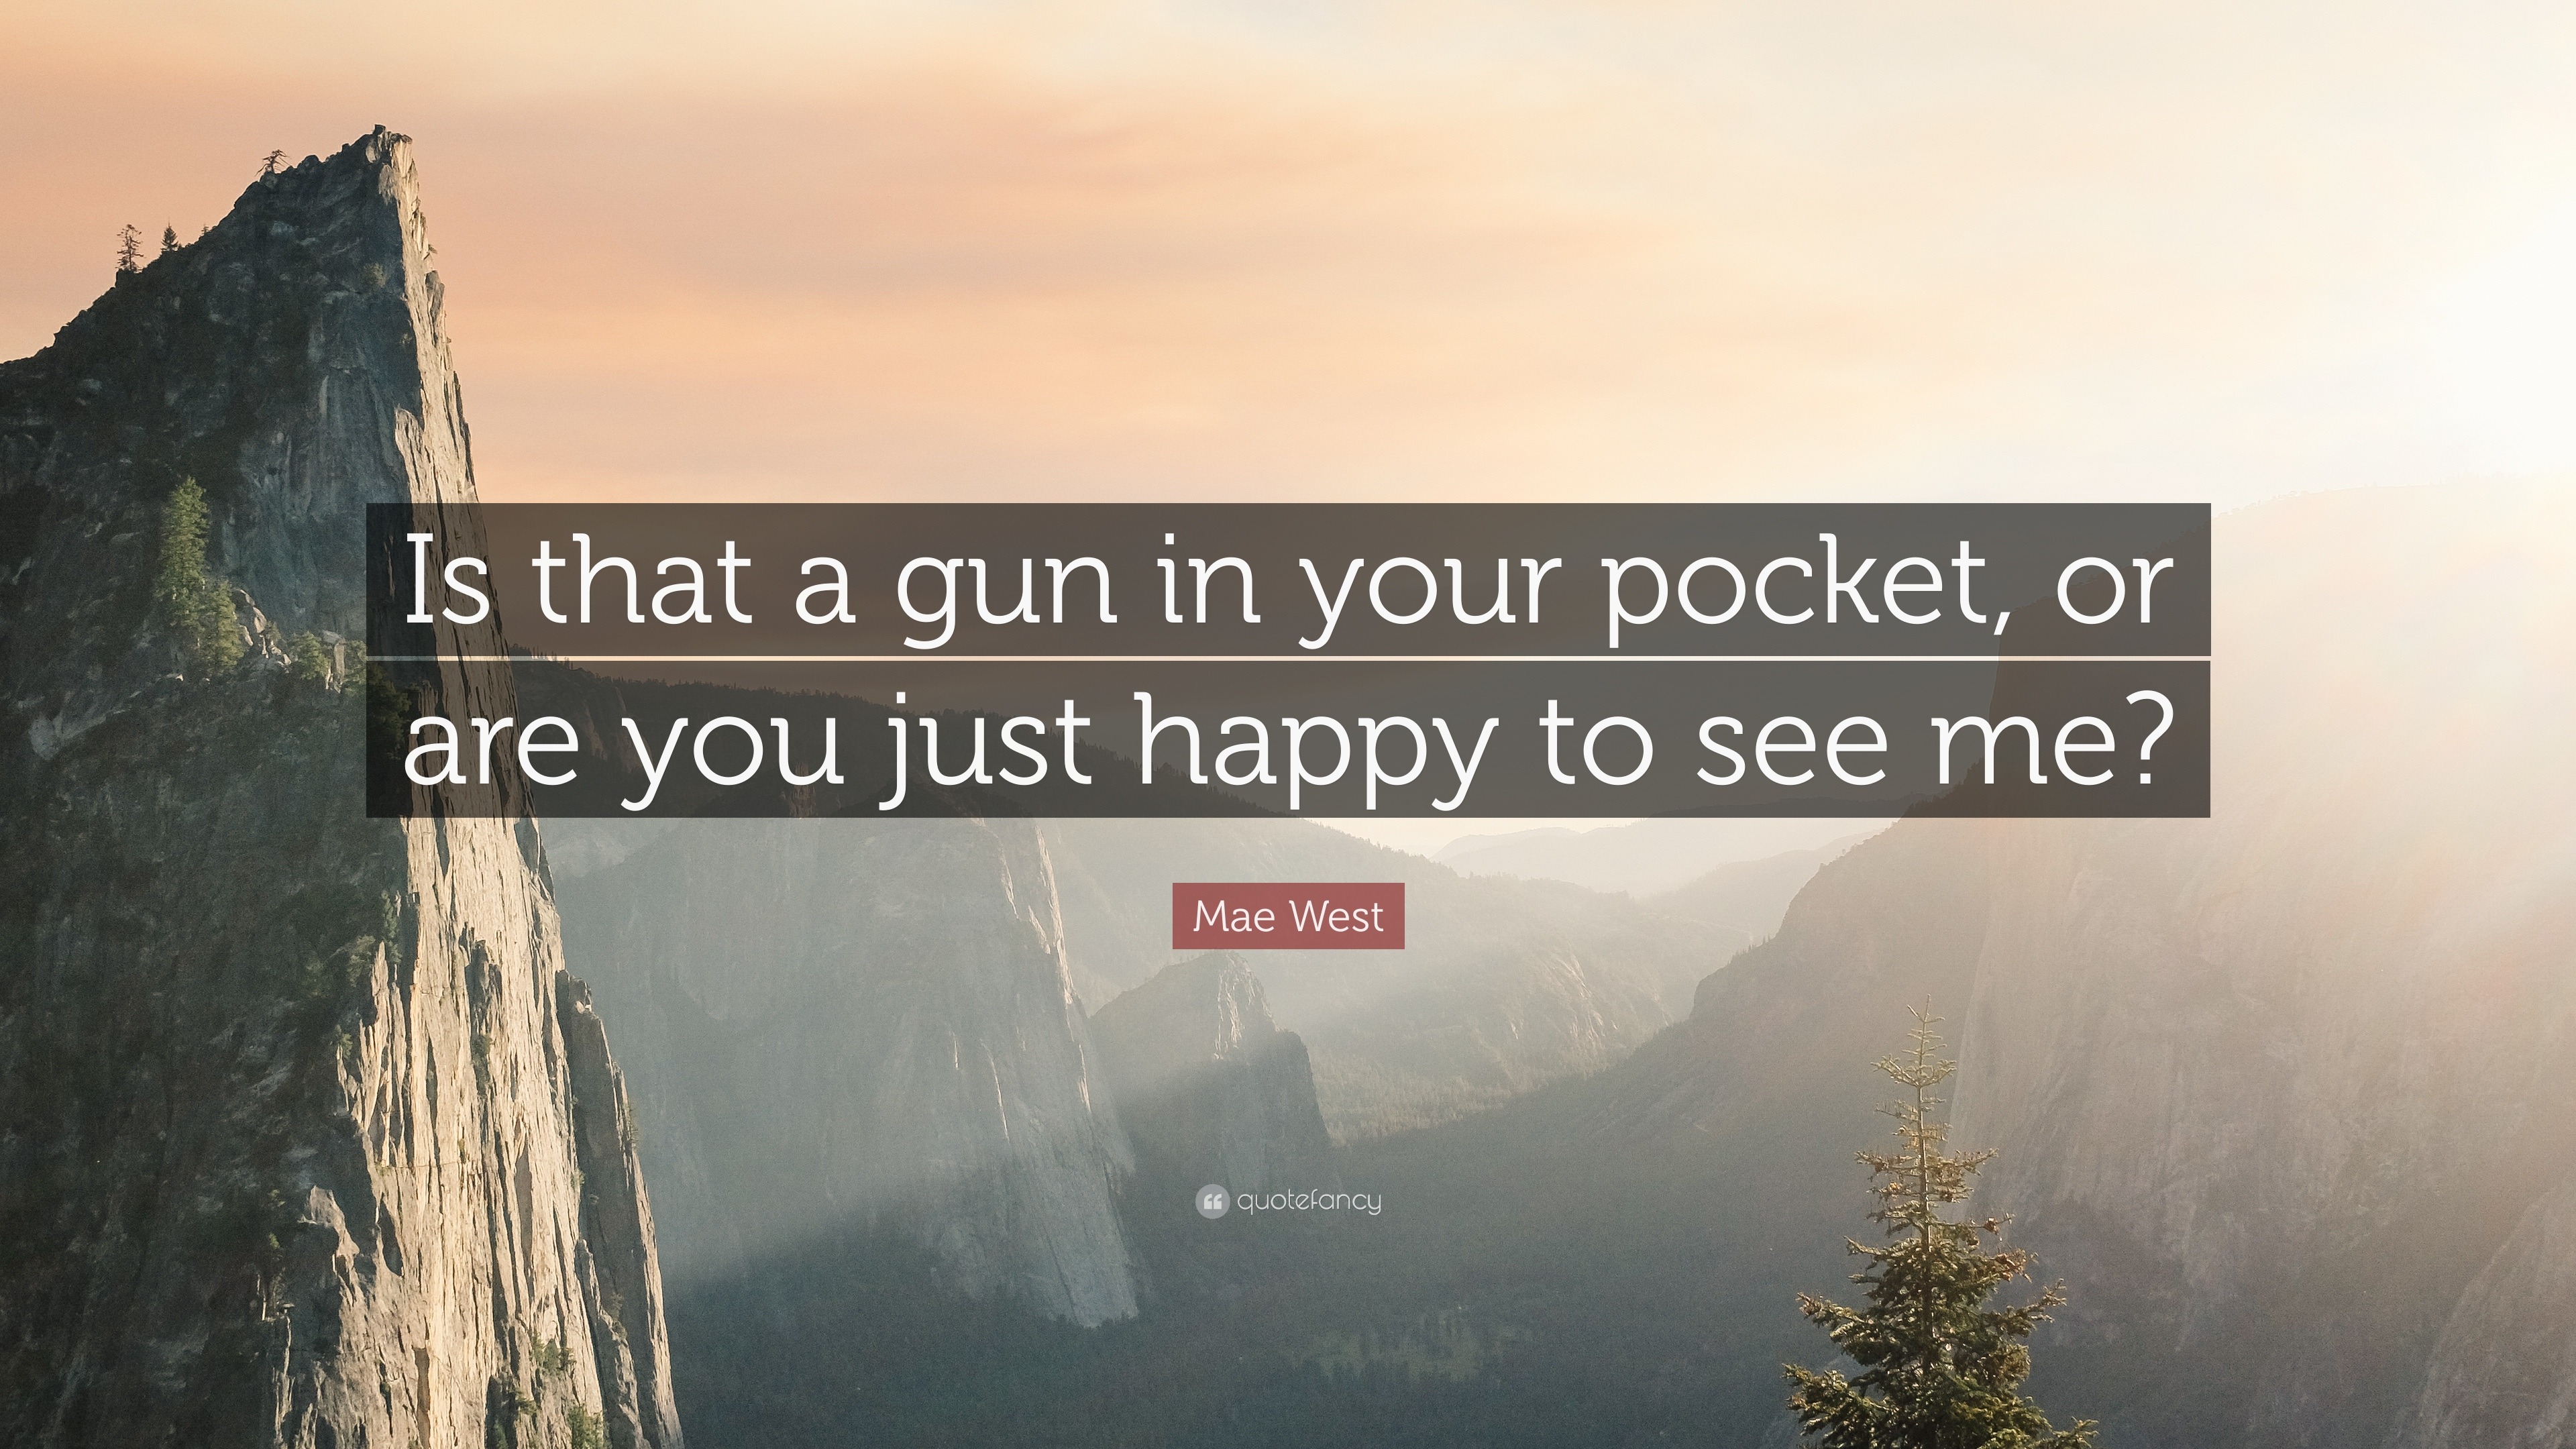 Mae West Quote: “Is that a gun in your pocket, or are you just